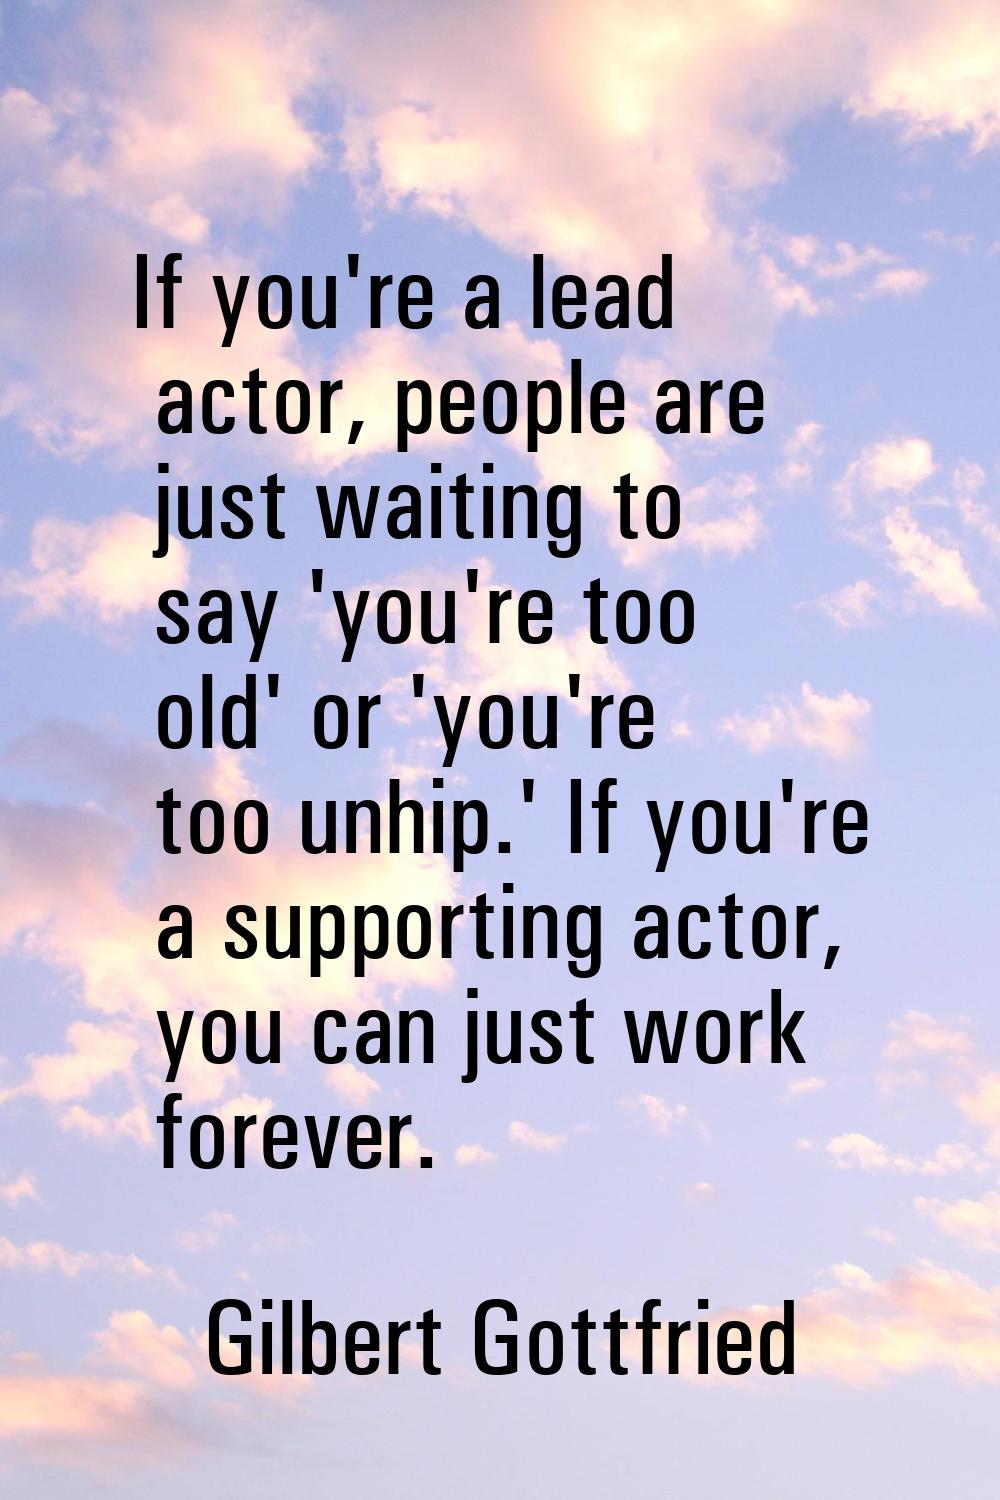 If you're a lead actor, people are just waiting to say 'you're too old' or 'you're too unhip.' If y